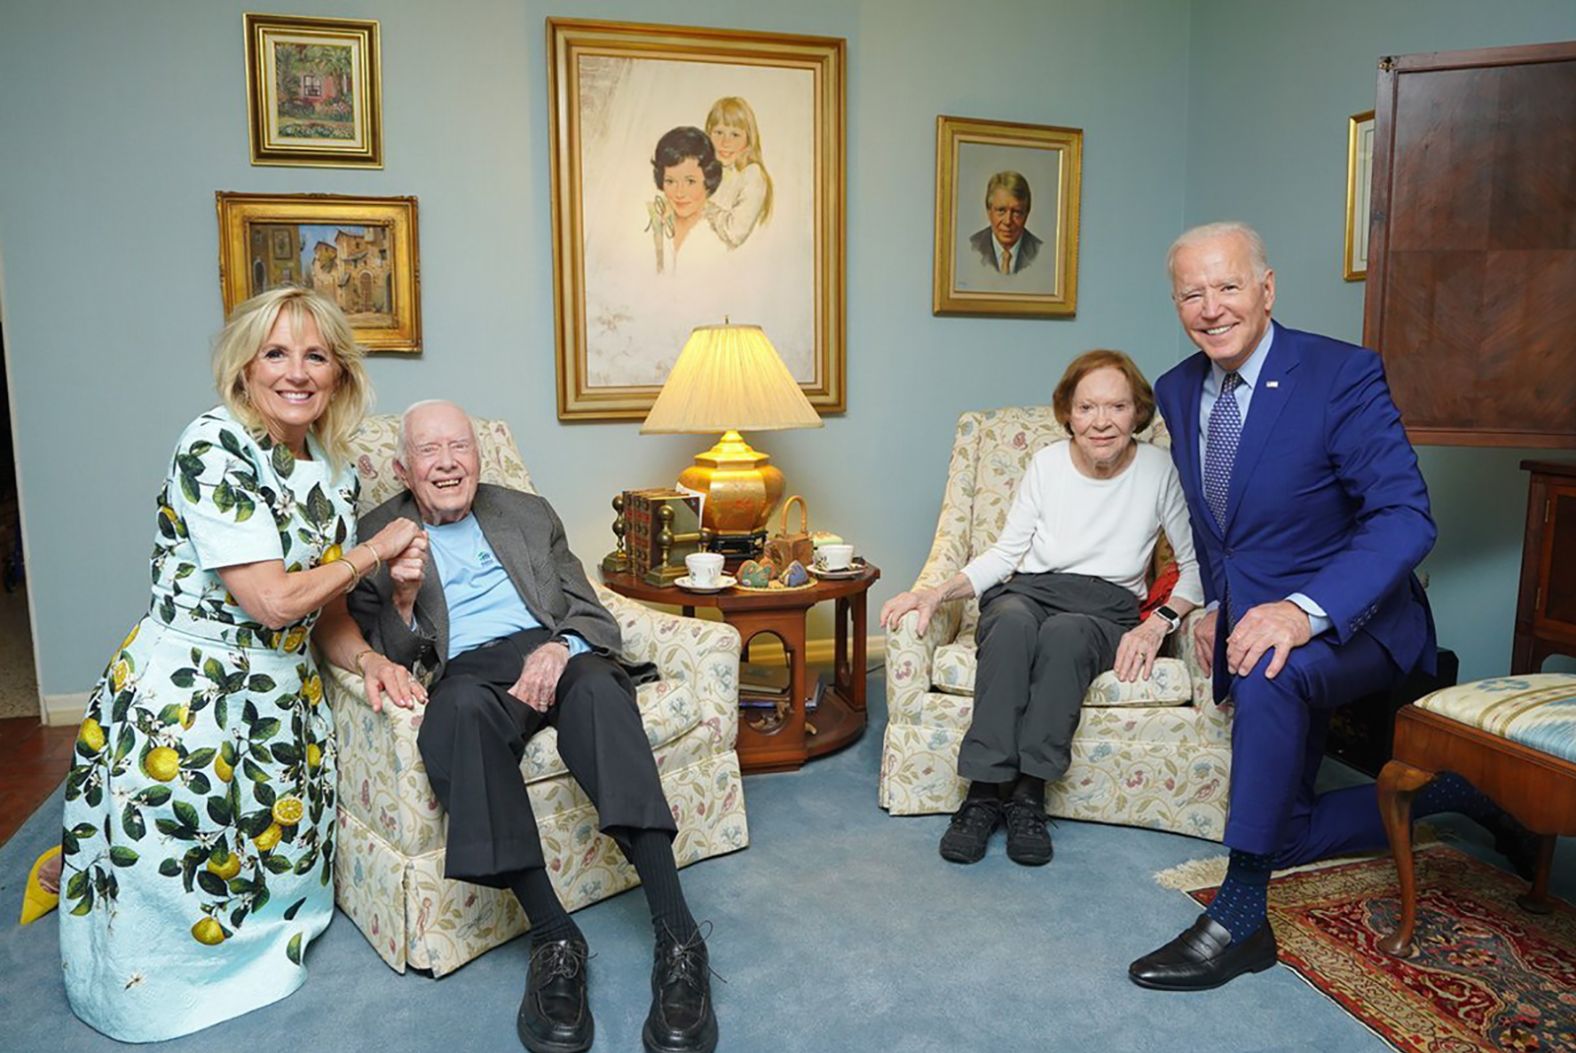 President Joe Biden and first lady Jill Biden <a href="index.php?page=&url=https%3A%2F%2Fwww.cnn.com%2F2021%2F04%2F29%2Fpolitics%2Fbidens-carters-visit-georgia%2Findex.html" target="_blank">met with the Carters</a> at the Carters' home in April 2021. The photo grabbed people's attention on social media because of what appeared to be a significant size difference between the two couples. While many experts theorized that it was the result of a wide-angle lens, Adam Schultz, the chief official White House photographer, declined to explain <a href="index.php?page=&url=https%3A%2F%2Fwww.nytimes.com%2F2021%2F05%2F05%2Fus%2Fpolitics%2Fbiden-carters-photo.html" target="_blank" target="_blank">when reached by The New York Times.</a>